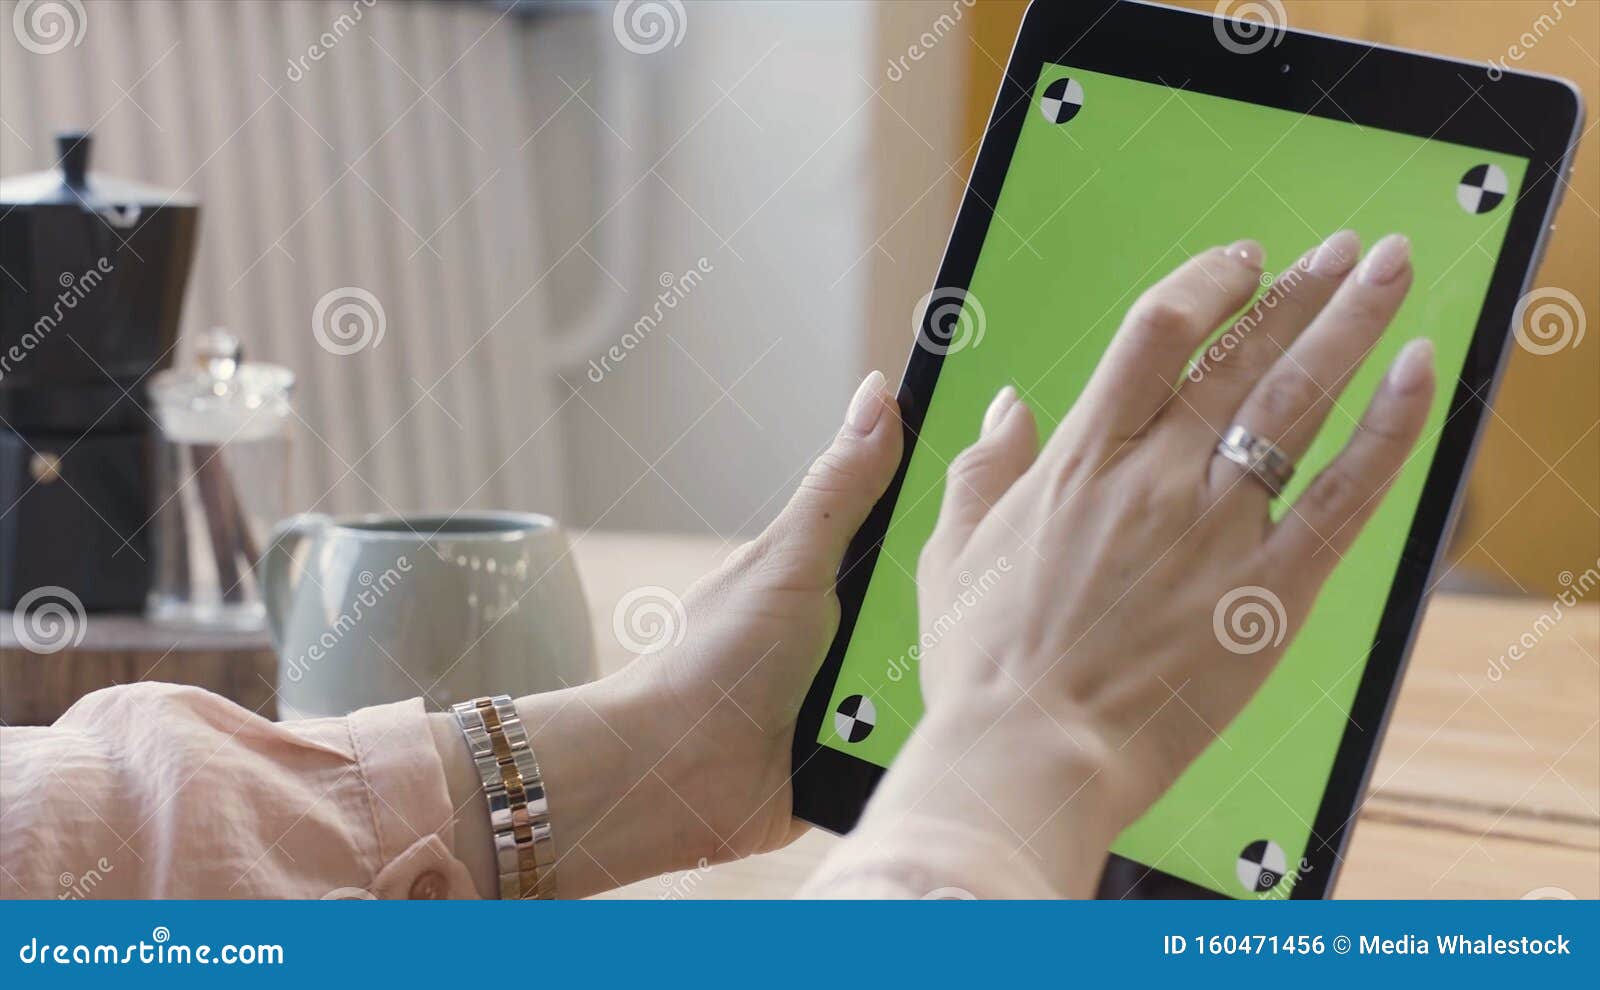 Woman Tapping, Scrolling on the Tablet Computer with Green Screen ...